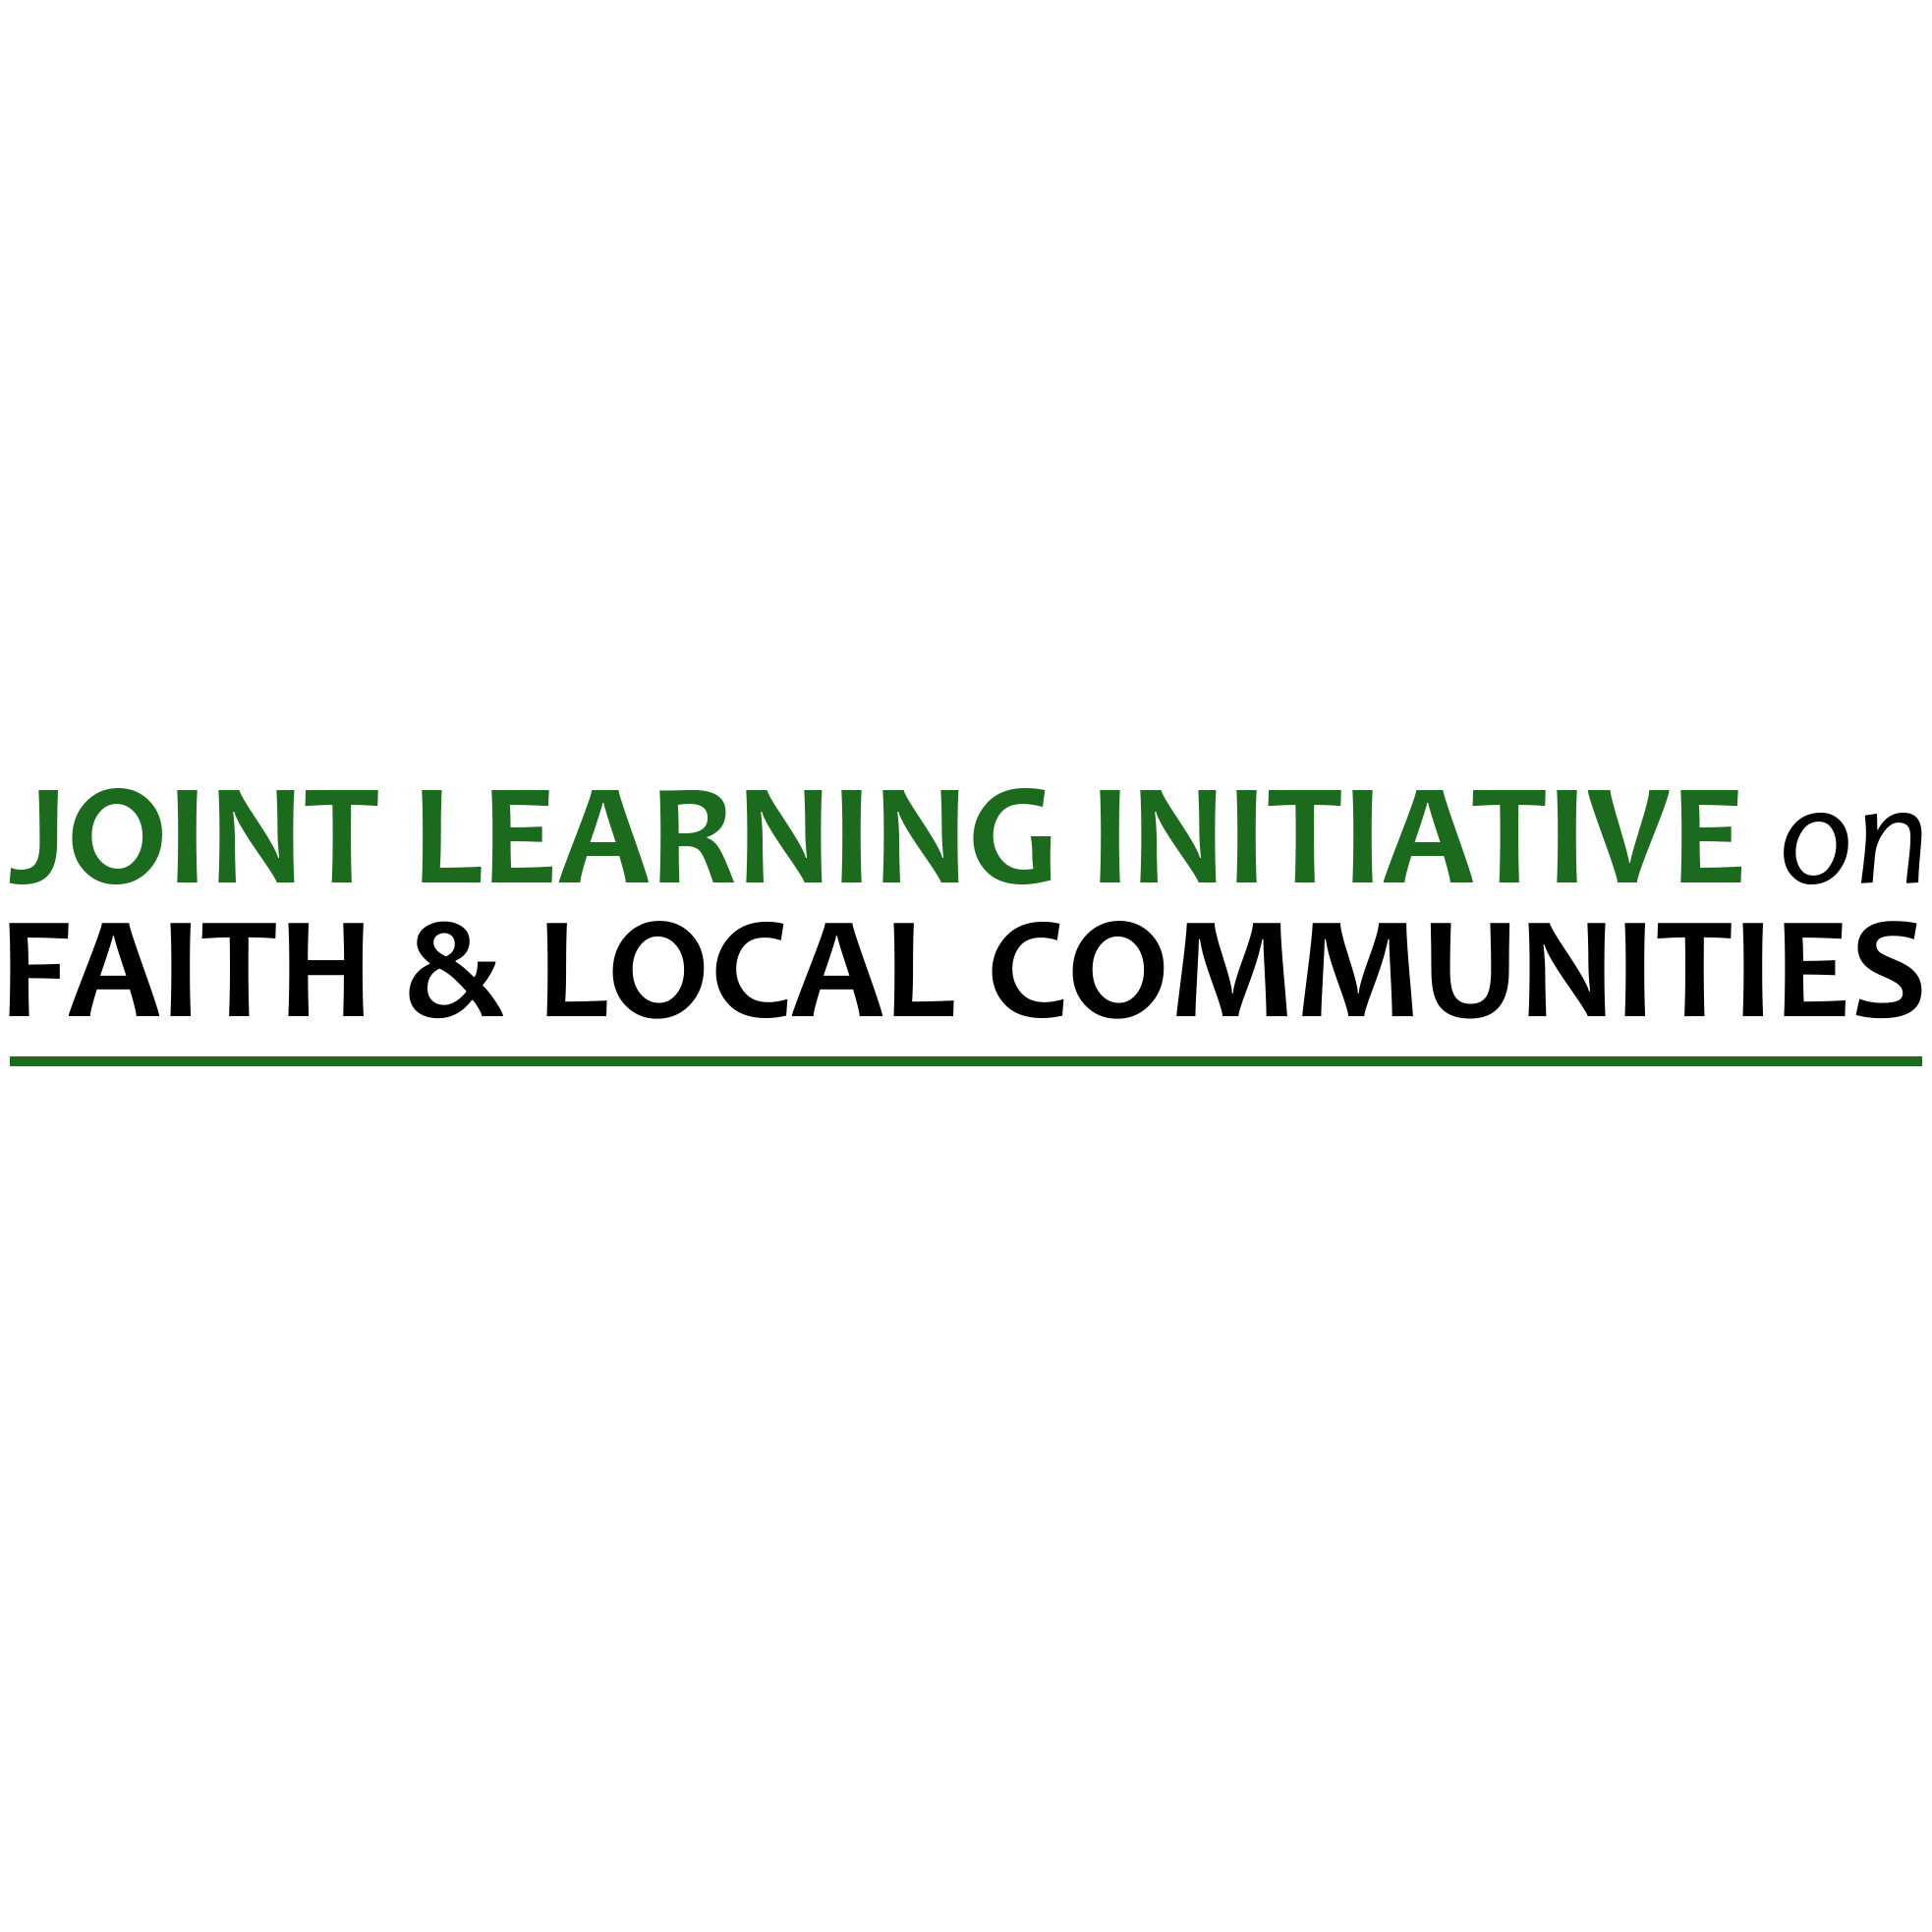 joint-learning-initiative-on-faith-and-local-communities-kaiciid